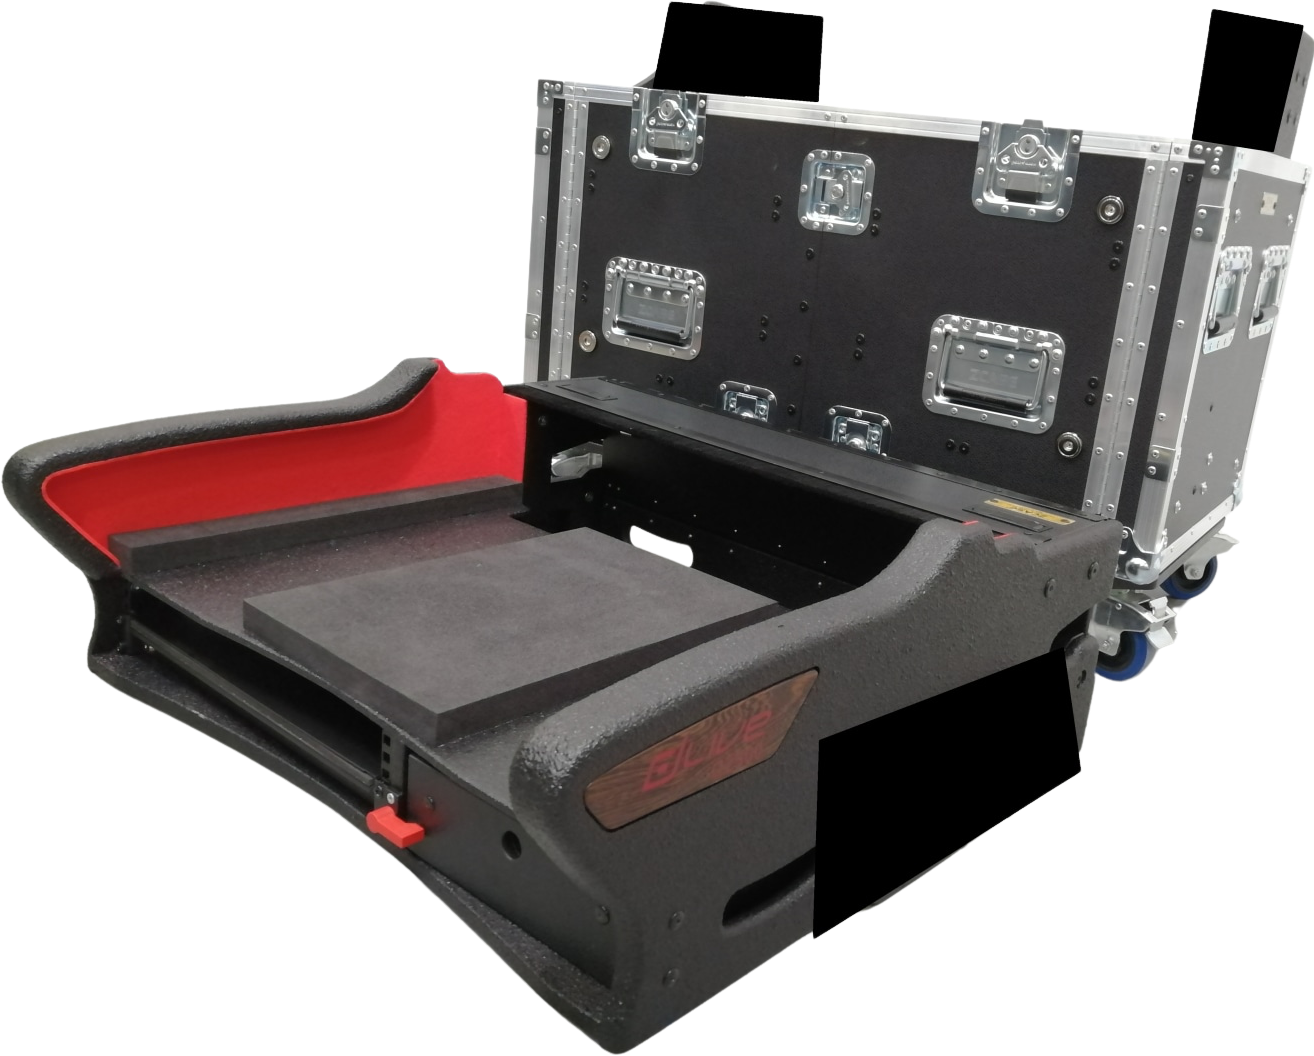 Pro X For Allen and Heath DLive C2500 Flip-Ready Hydraulic Console Easy Retracting Lifting 2U Rack Space Detachable Case by ZCASE XZF-AH-C2500 D 2U